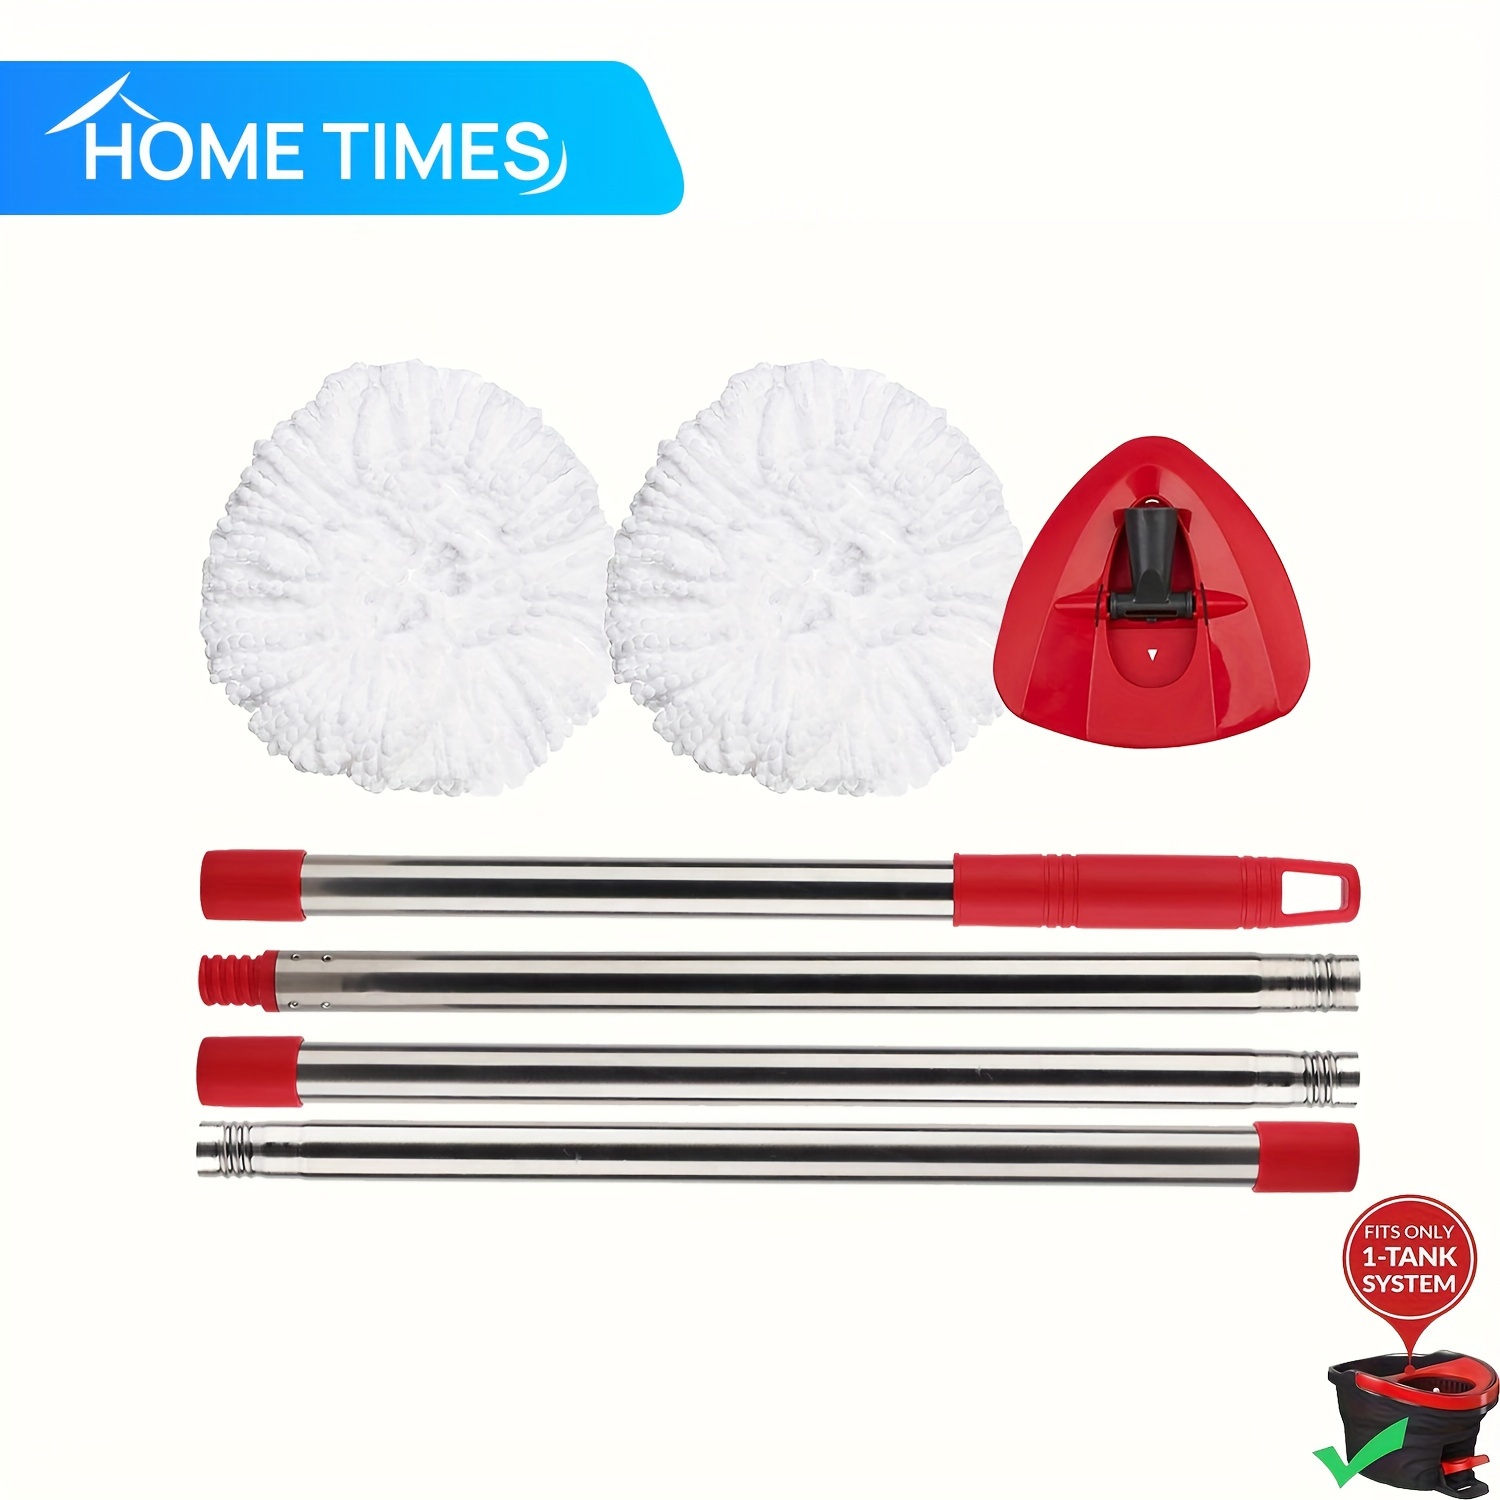 

Home Times Complete Spin Mop Kit - Compatible With Easywring System, Includes 2 Microfiber Heads, Adjustable Handle (30-58"), And Base - Premium Cleaning Accessories